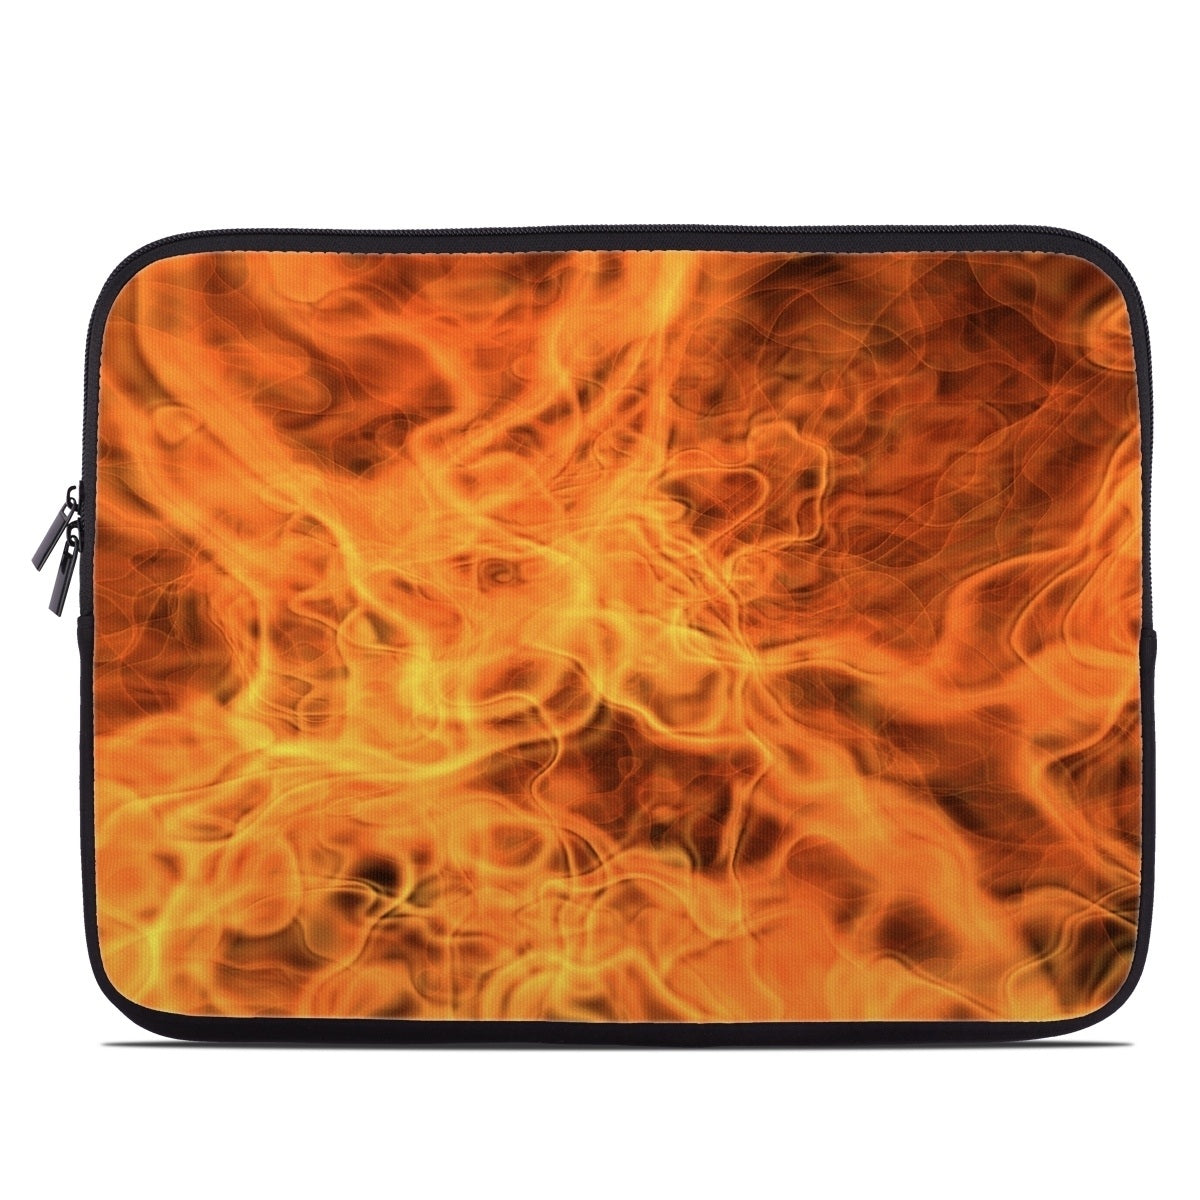 Combustion - Laptop Sleeve